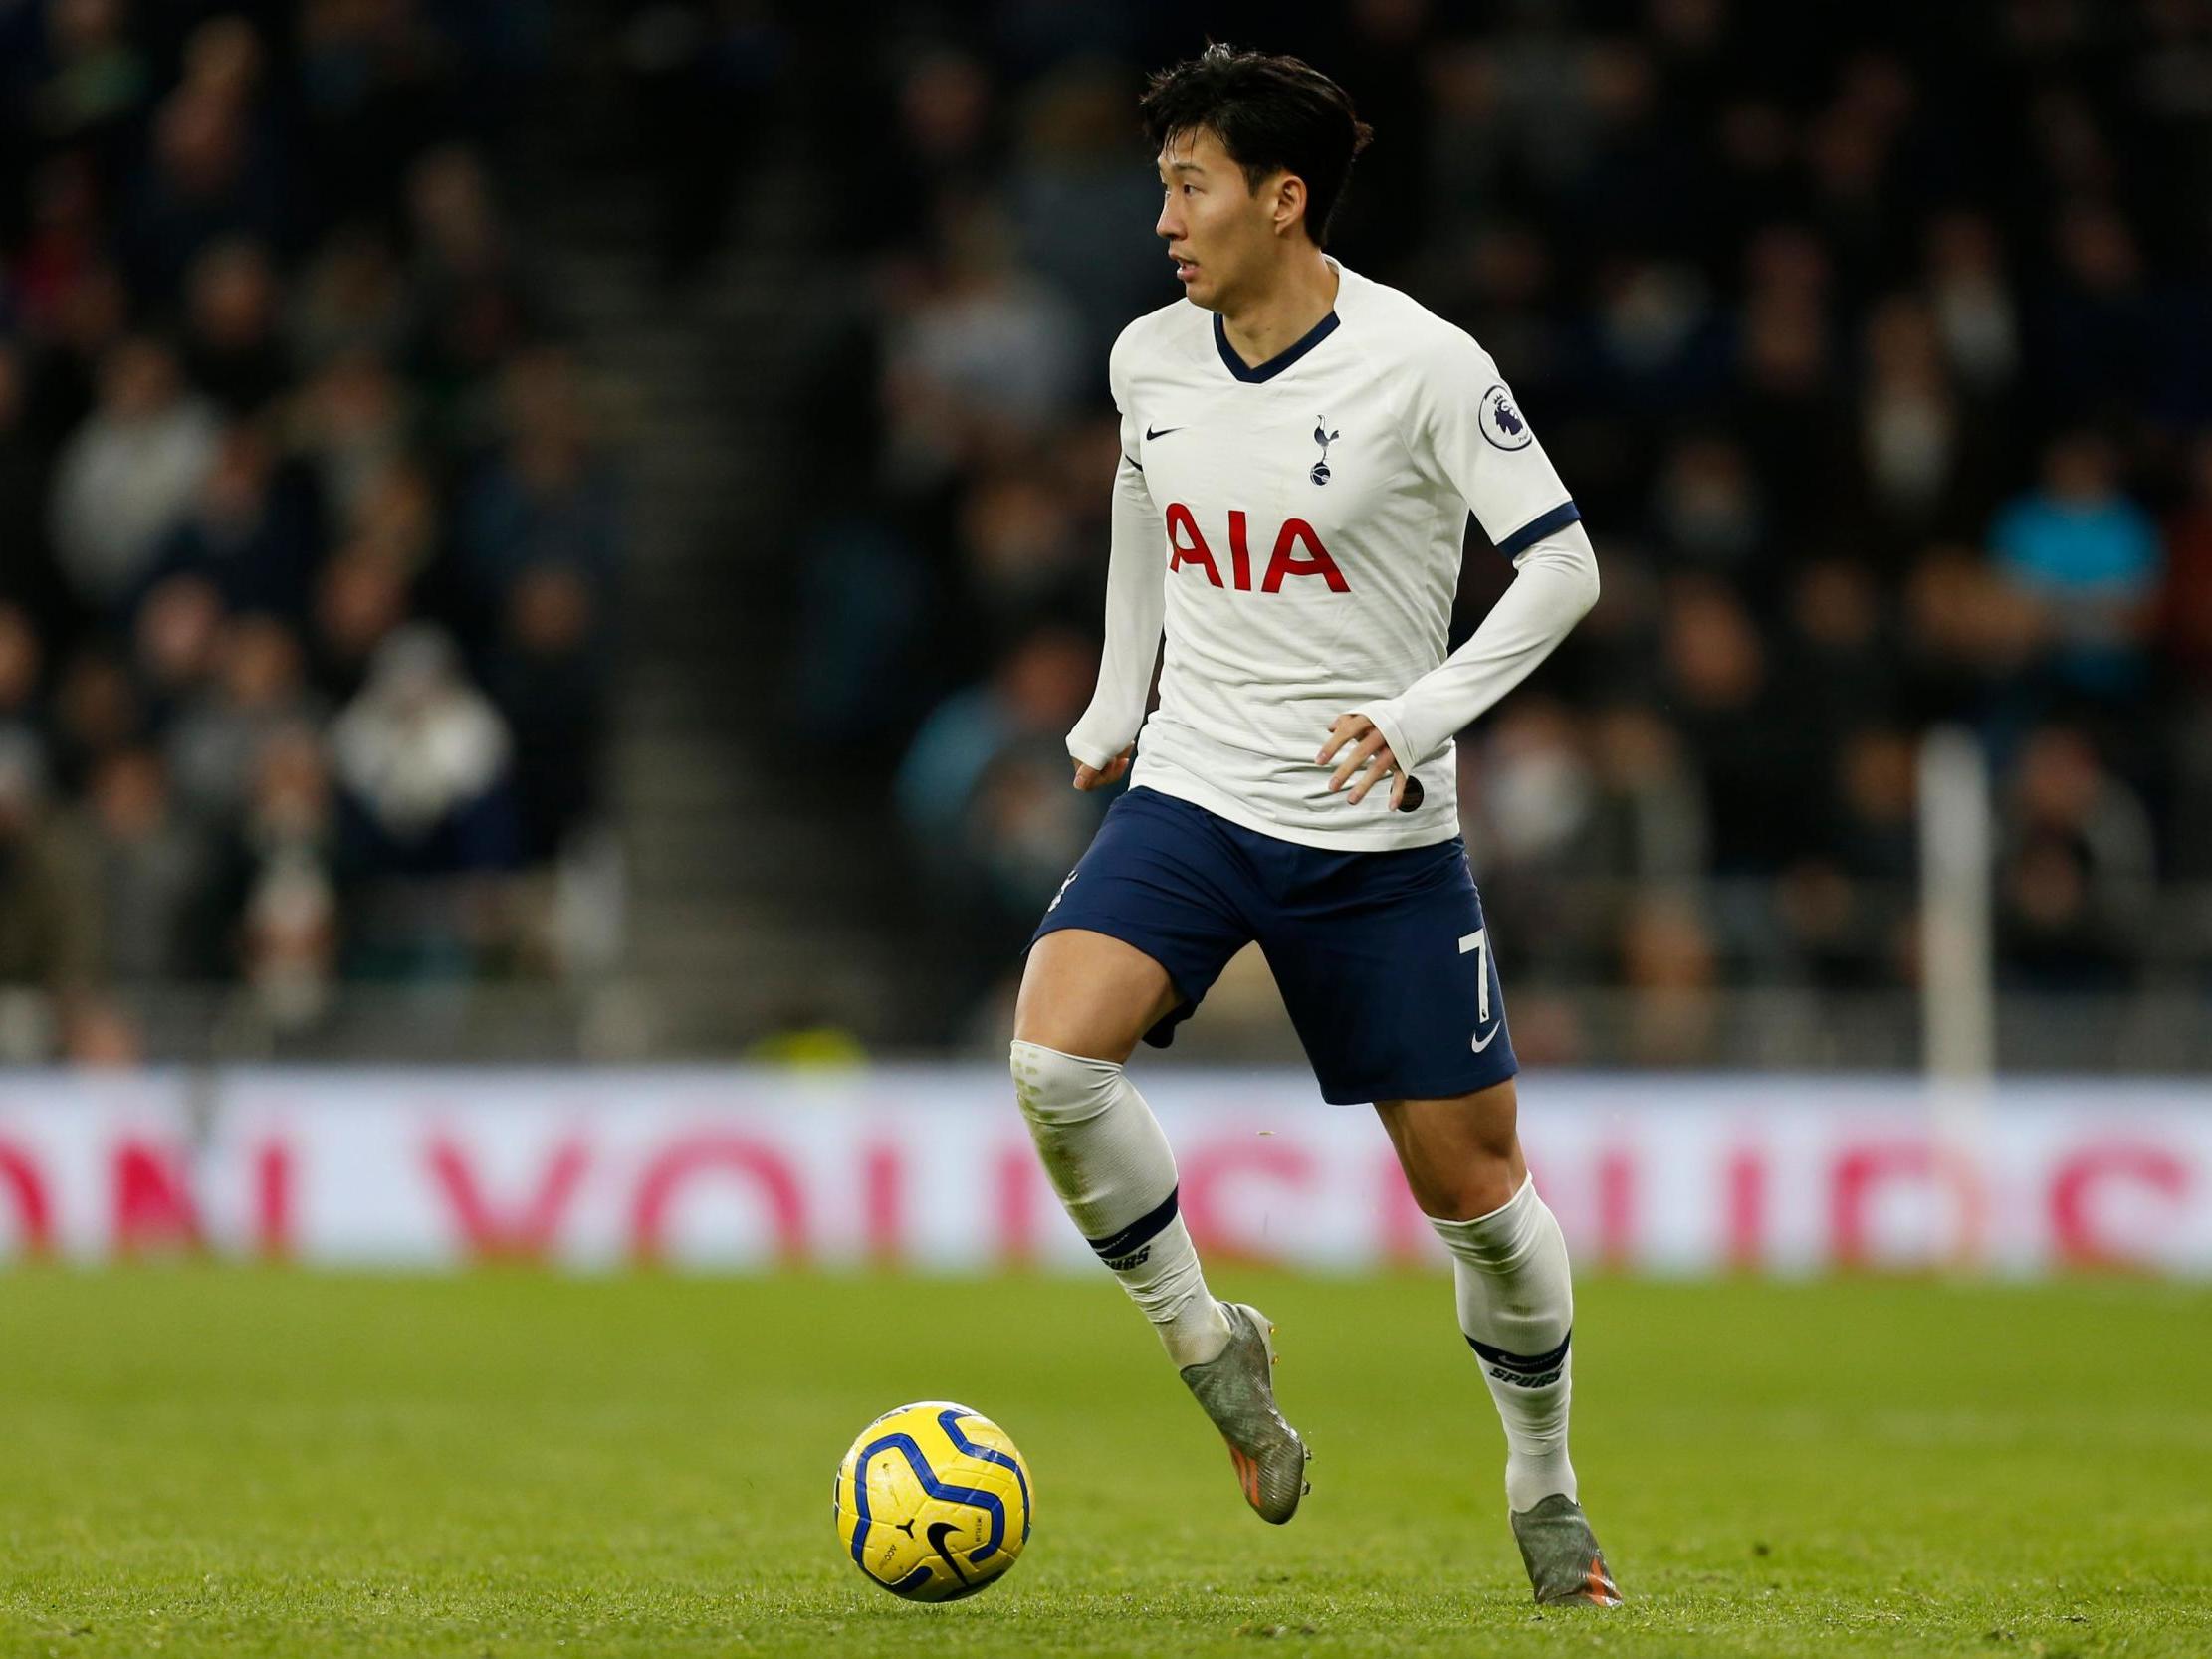 The South Korean scored a sublime goal against Burnley over the weekend